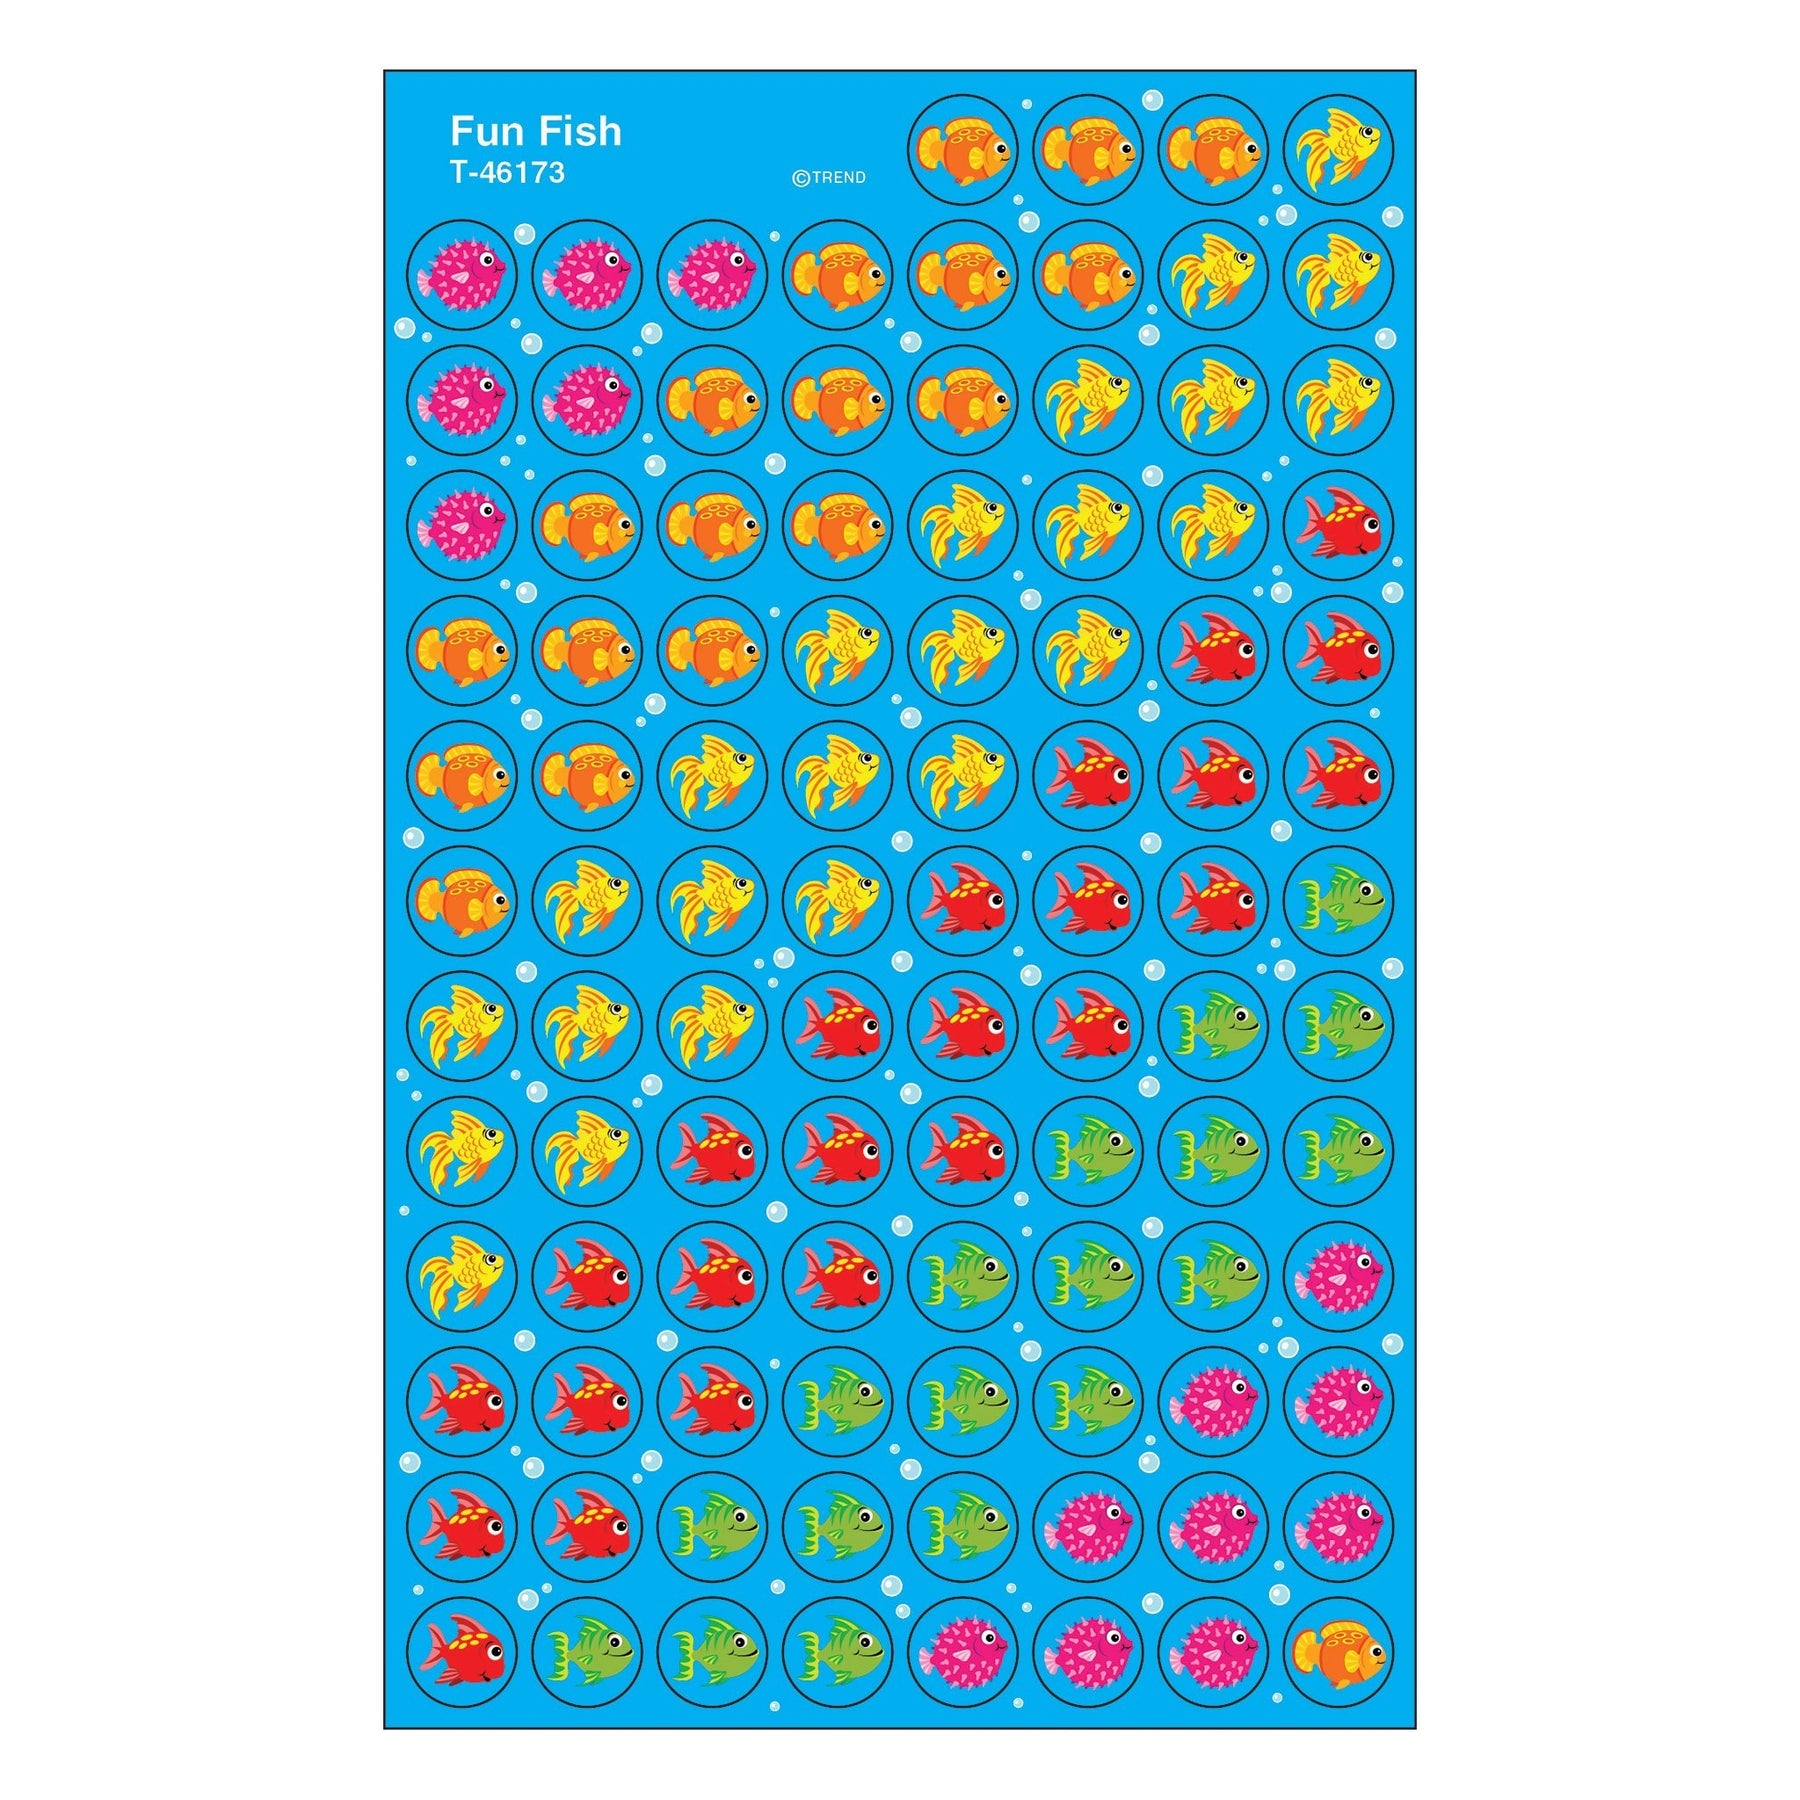 Trend Fun Fish superSpots® Stickers (T 46173)